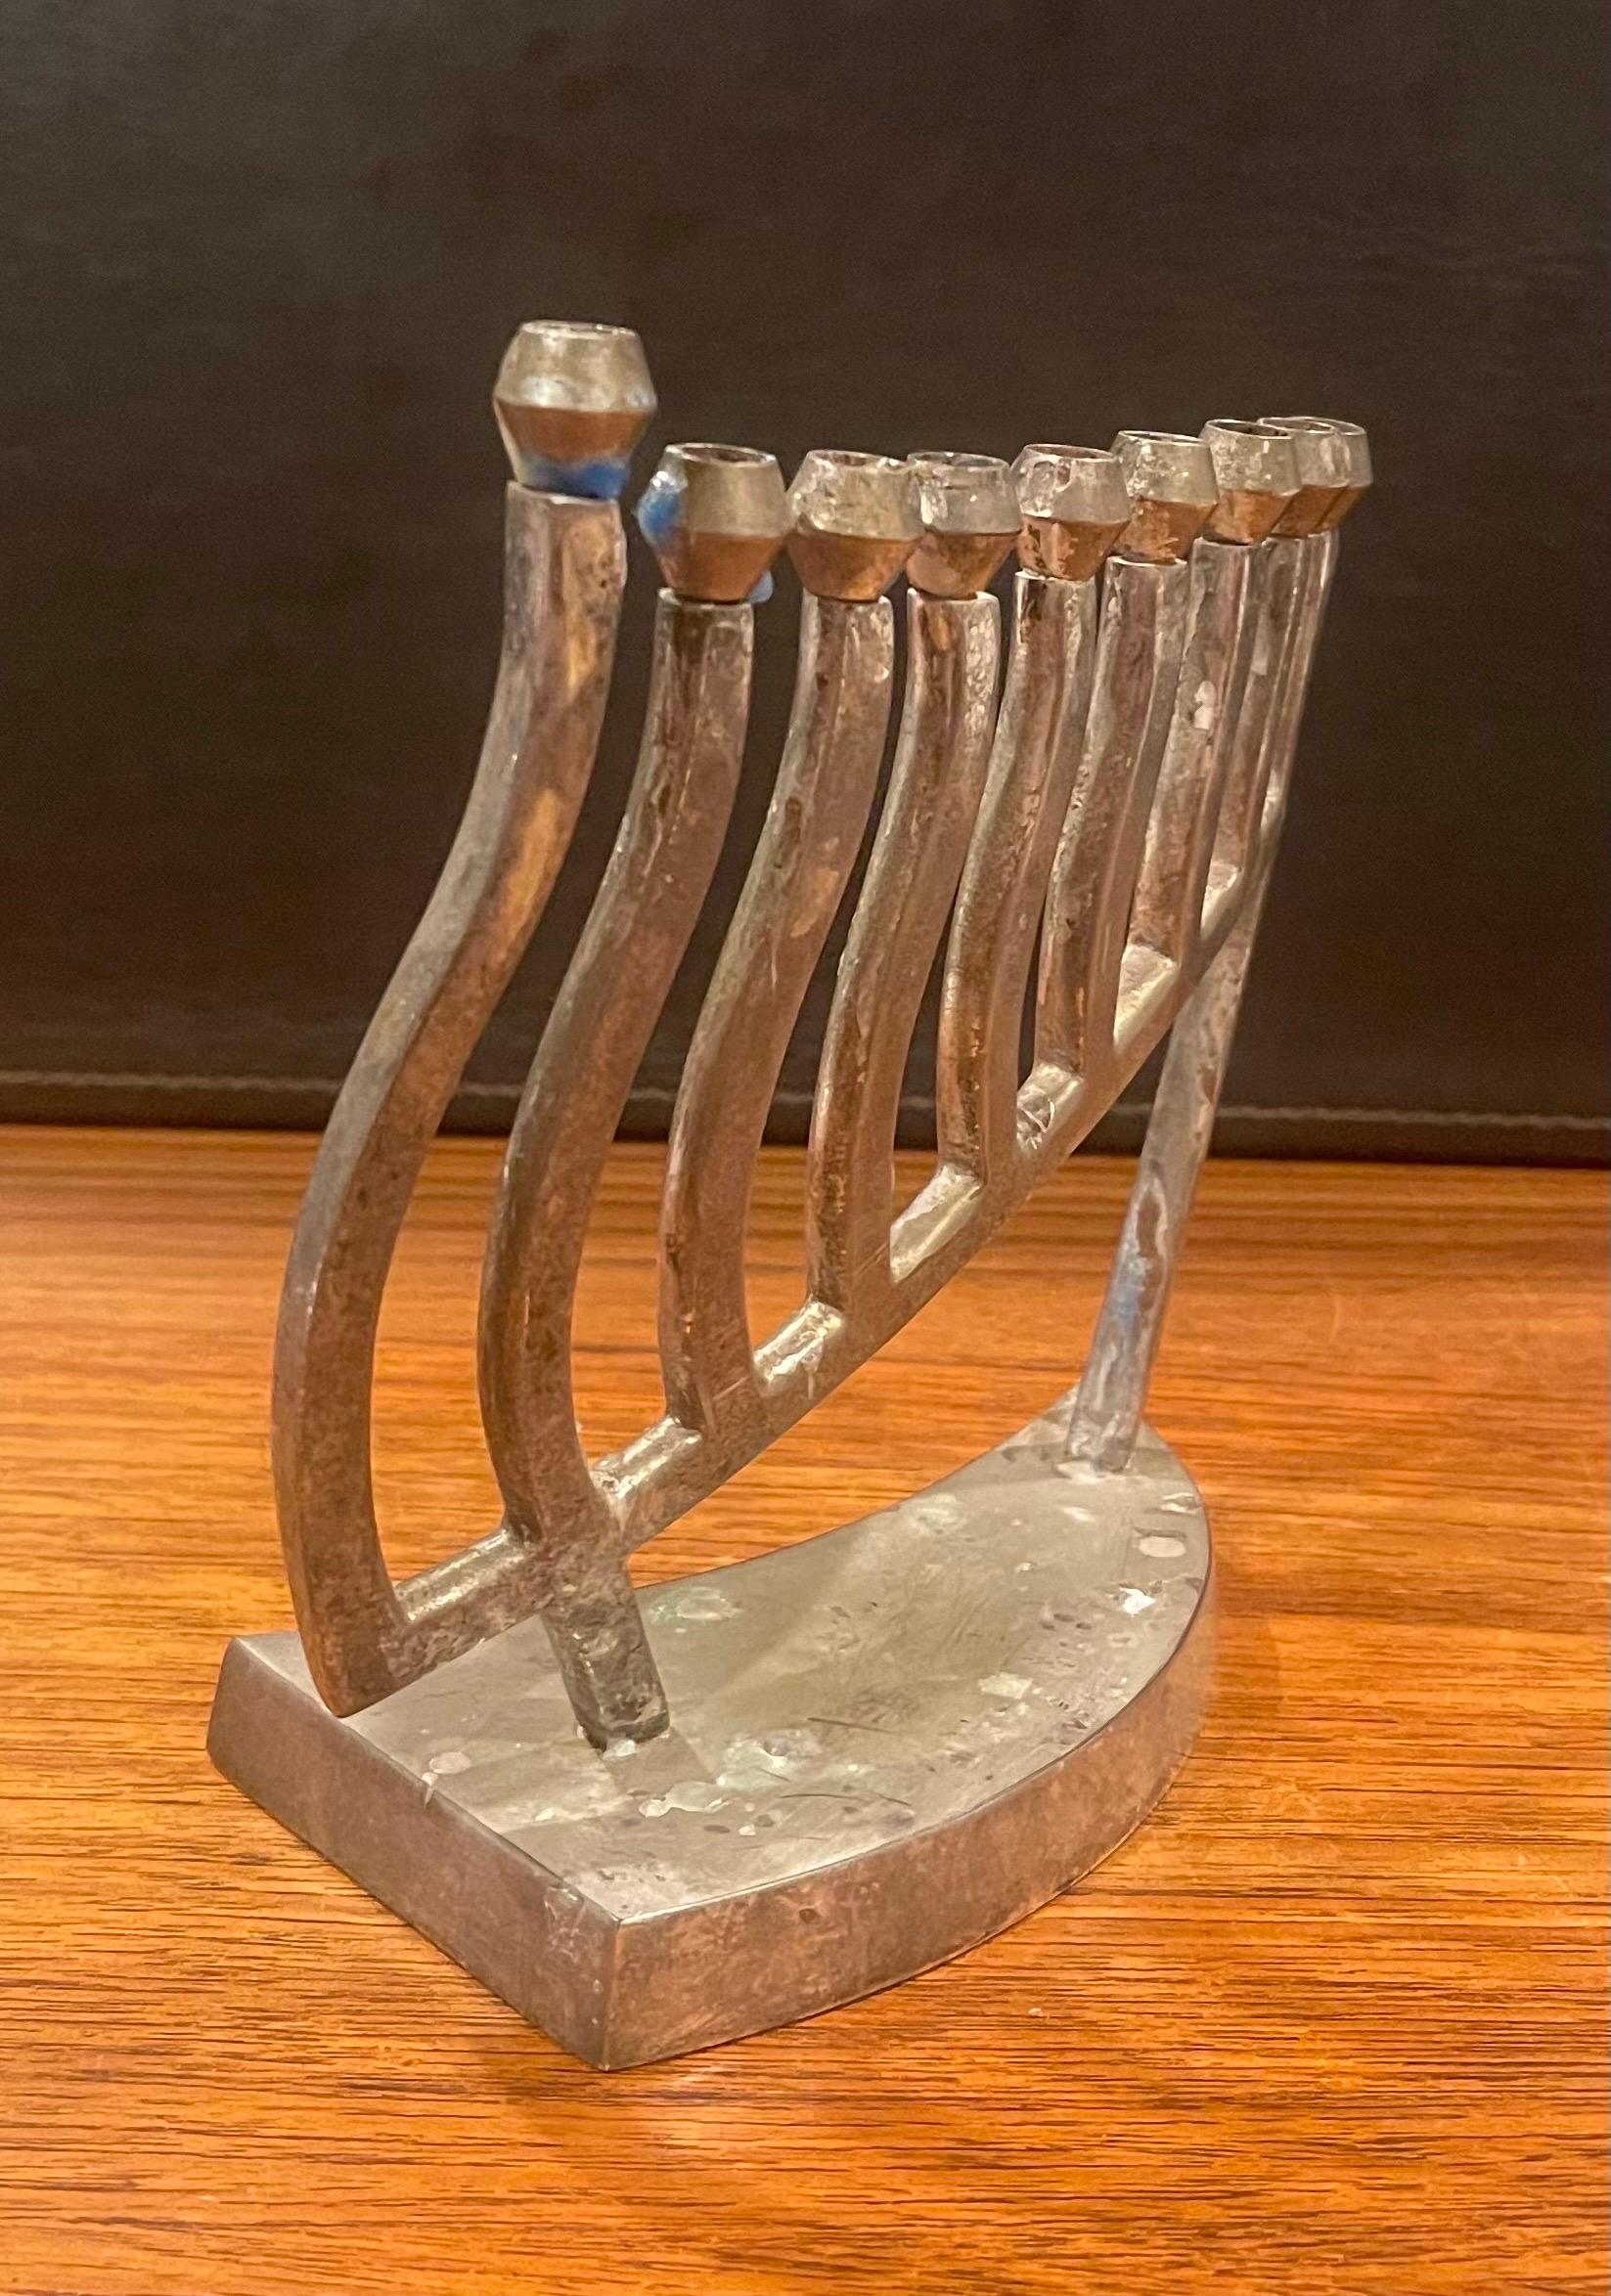 Modernist silver plate menorah, circa 1970s. The menorah is in fair condition with some spotting to the plate and measures 6.5